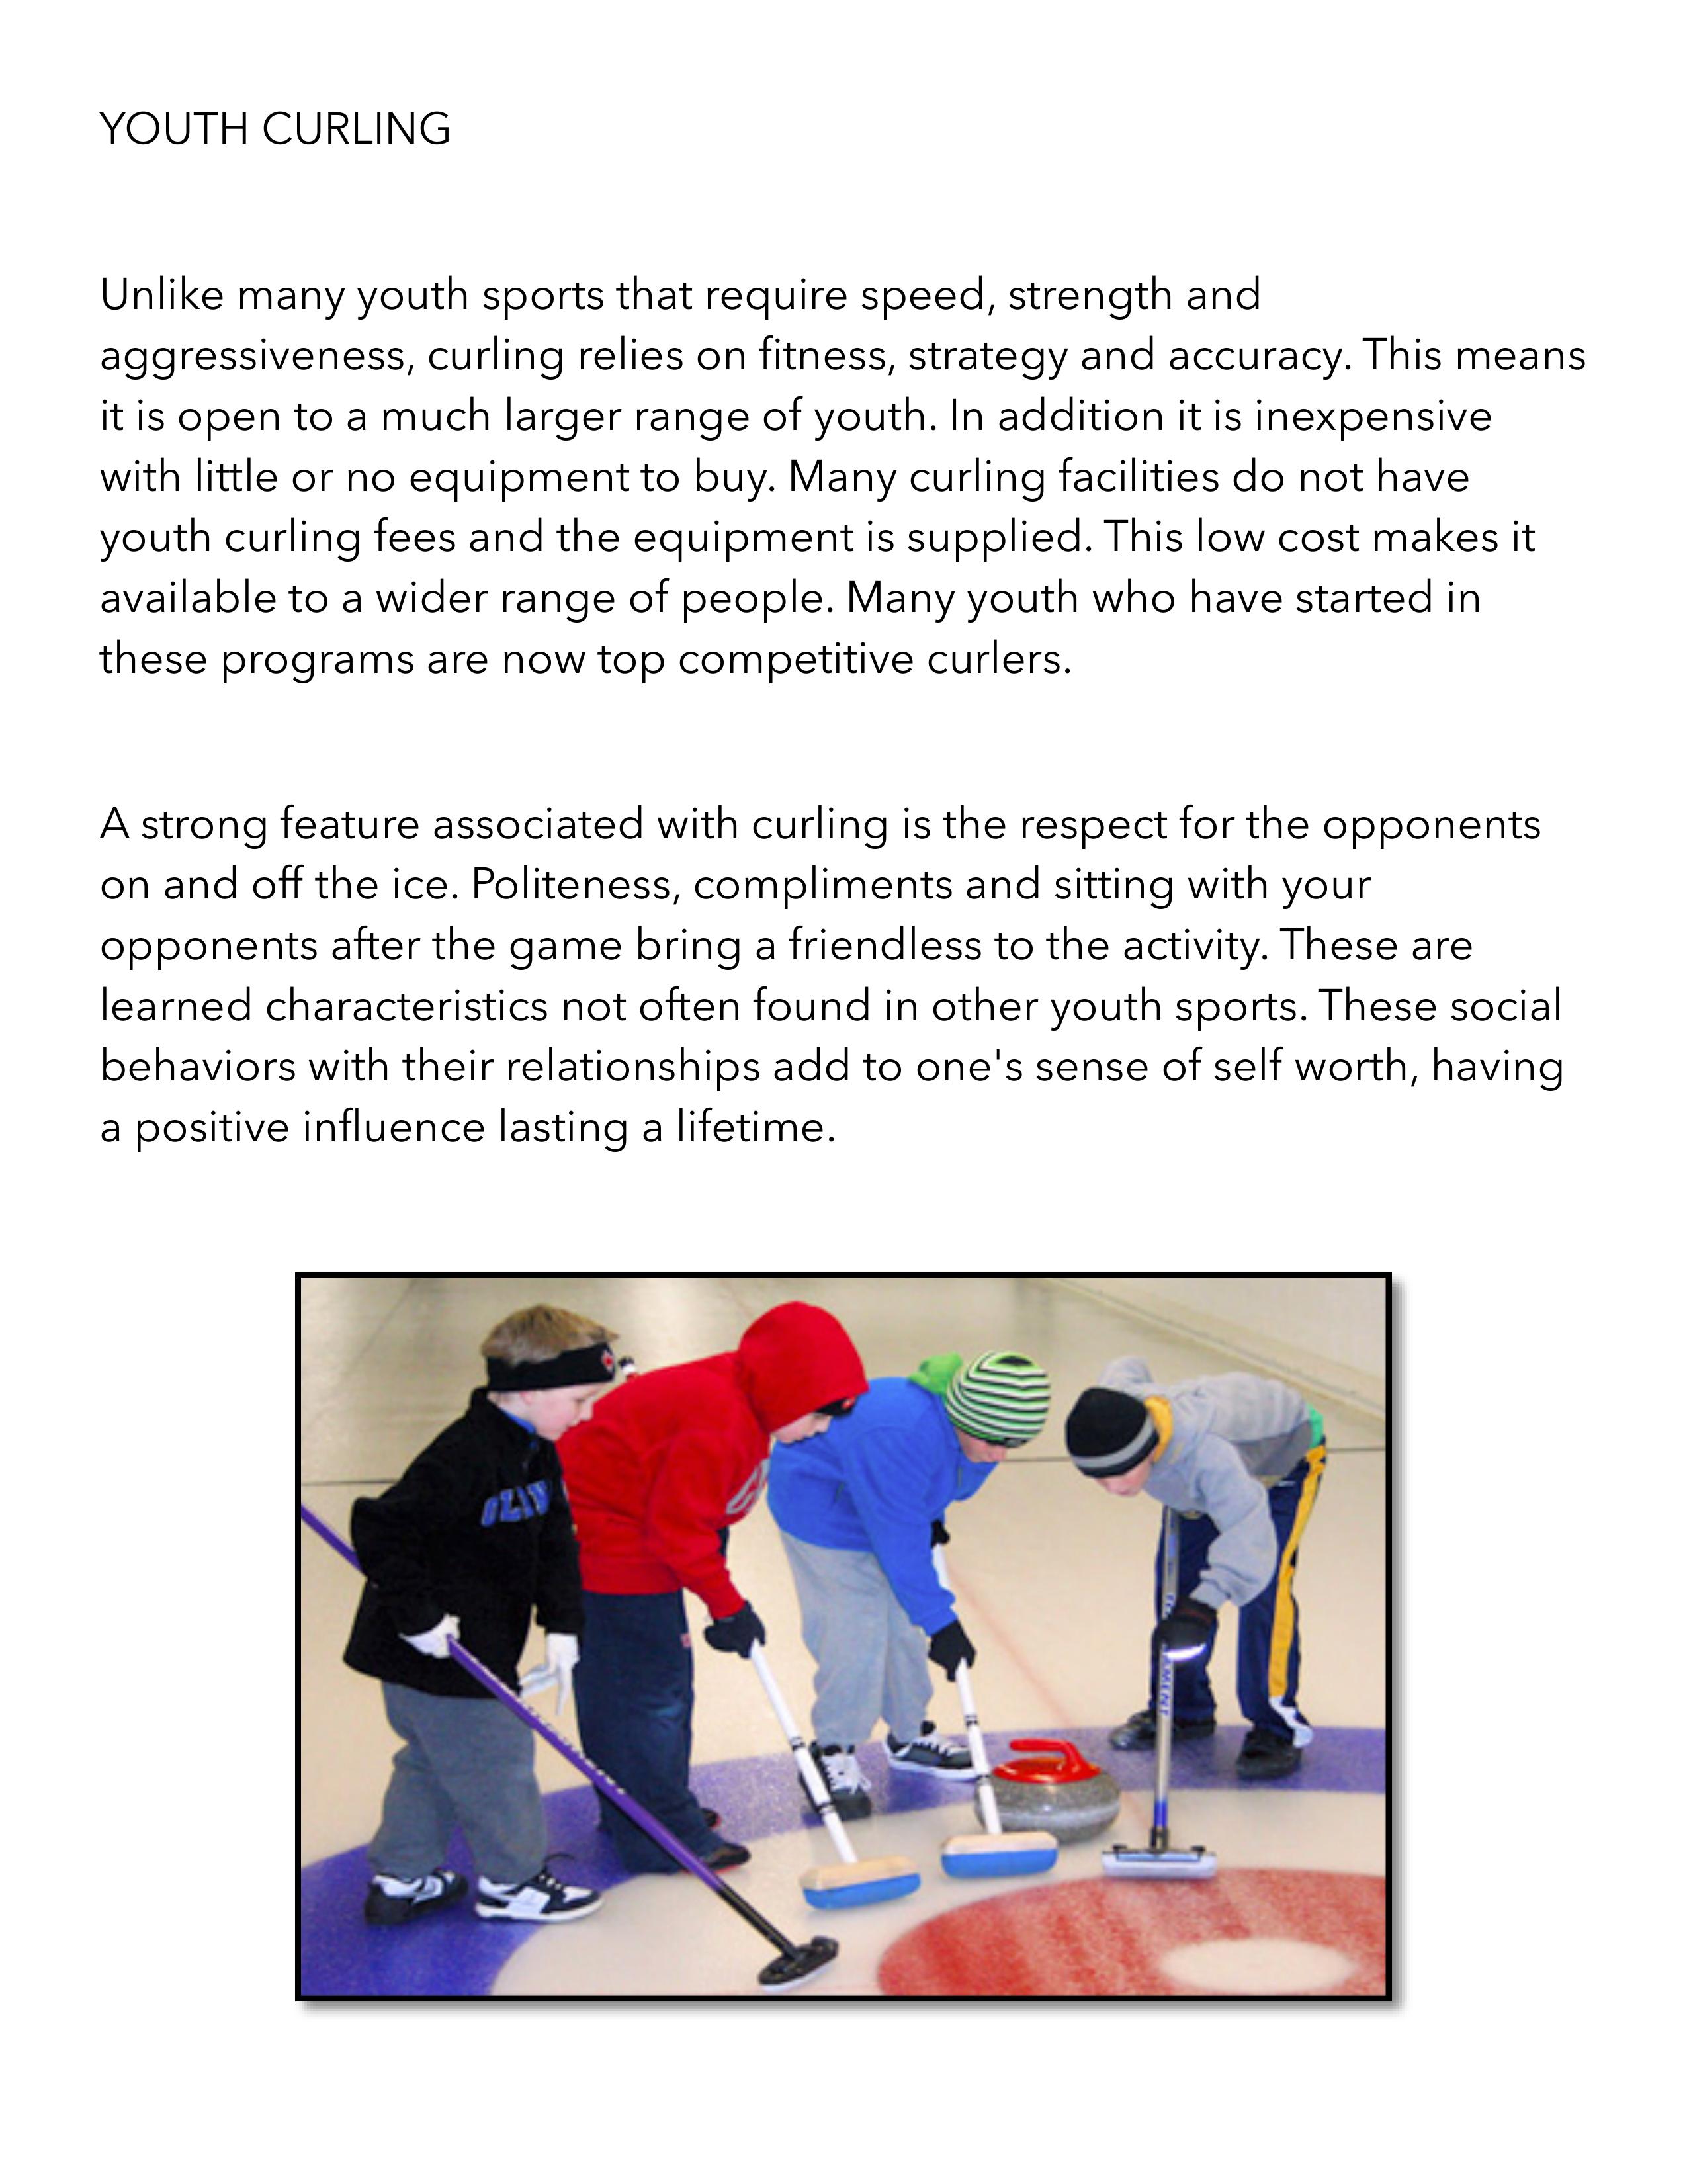 SCVCC Youth Curling